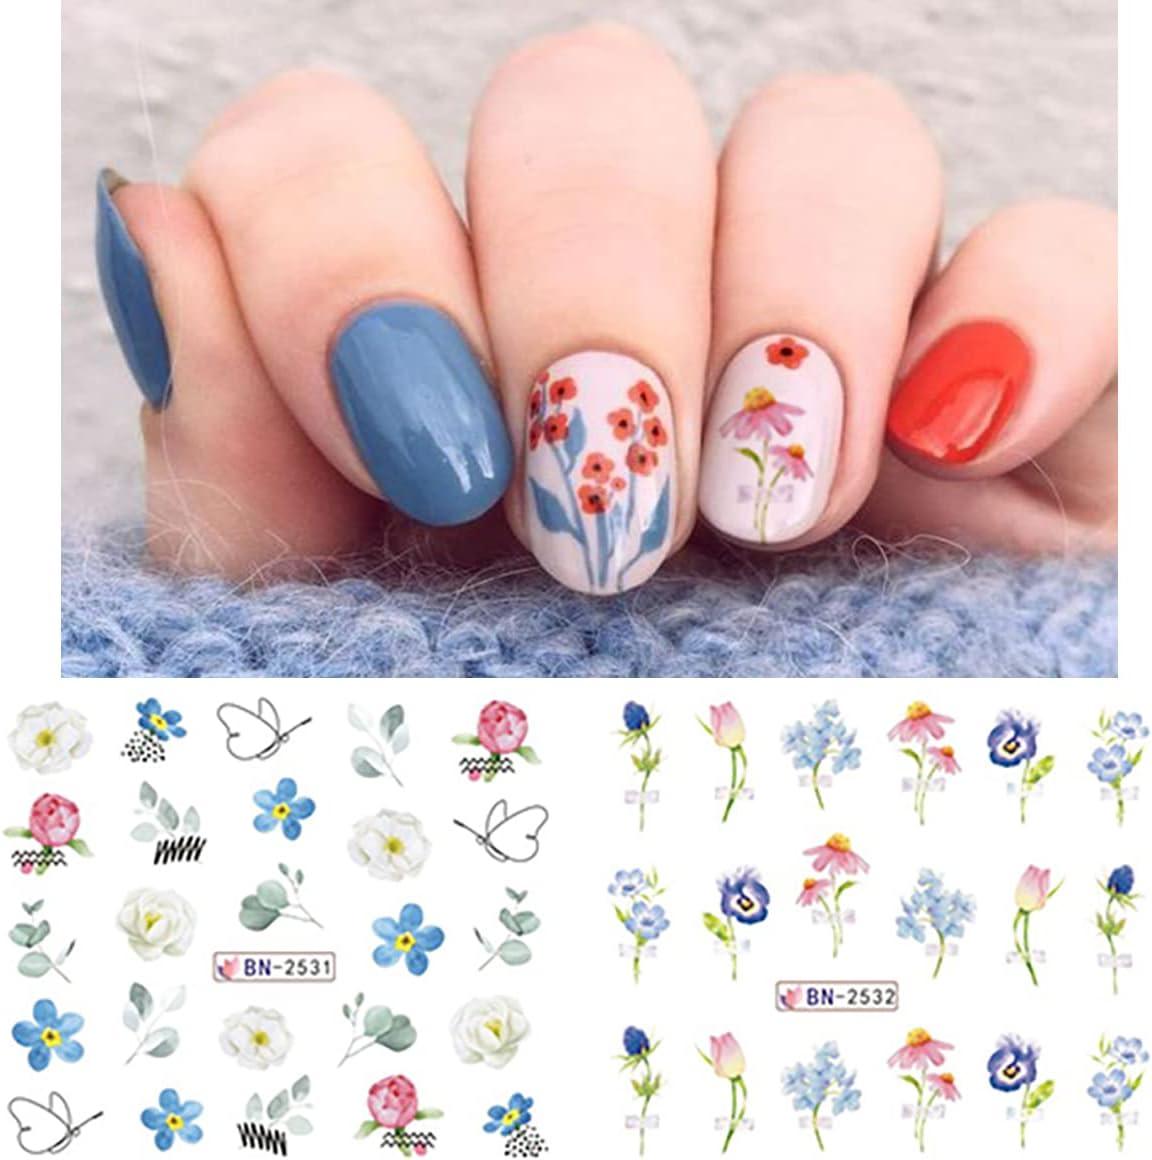 Embossed 5D Nail Stickers Elegant White Acrylic Flowers Sliders For Nails  Floral Petals Decor Cherry Blossom Decals GLJI-5D08 - AliExpress